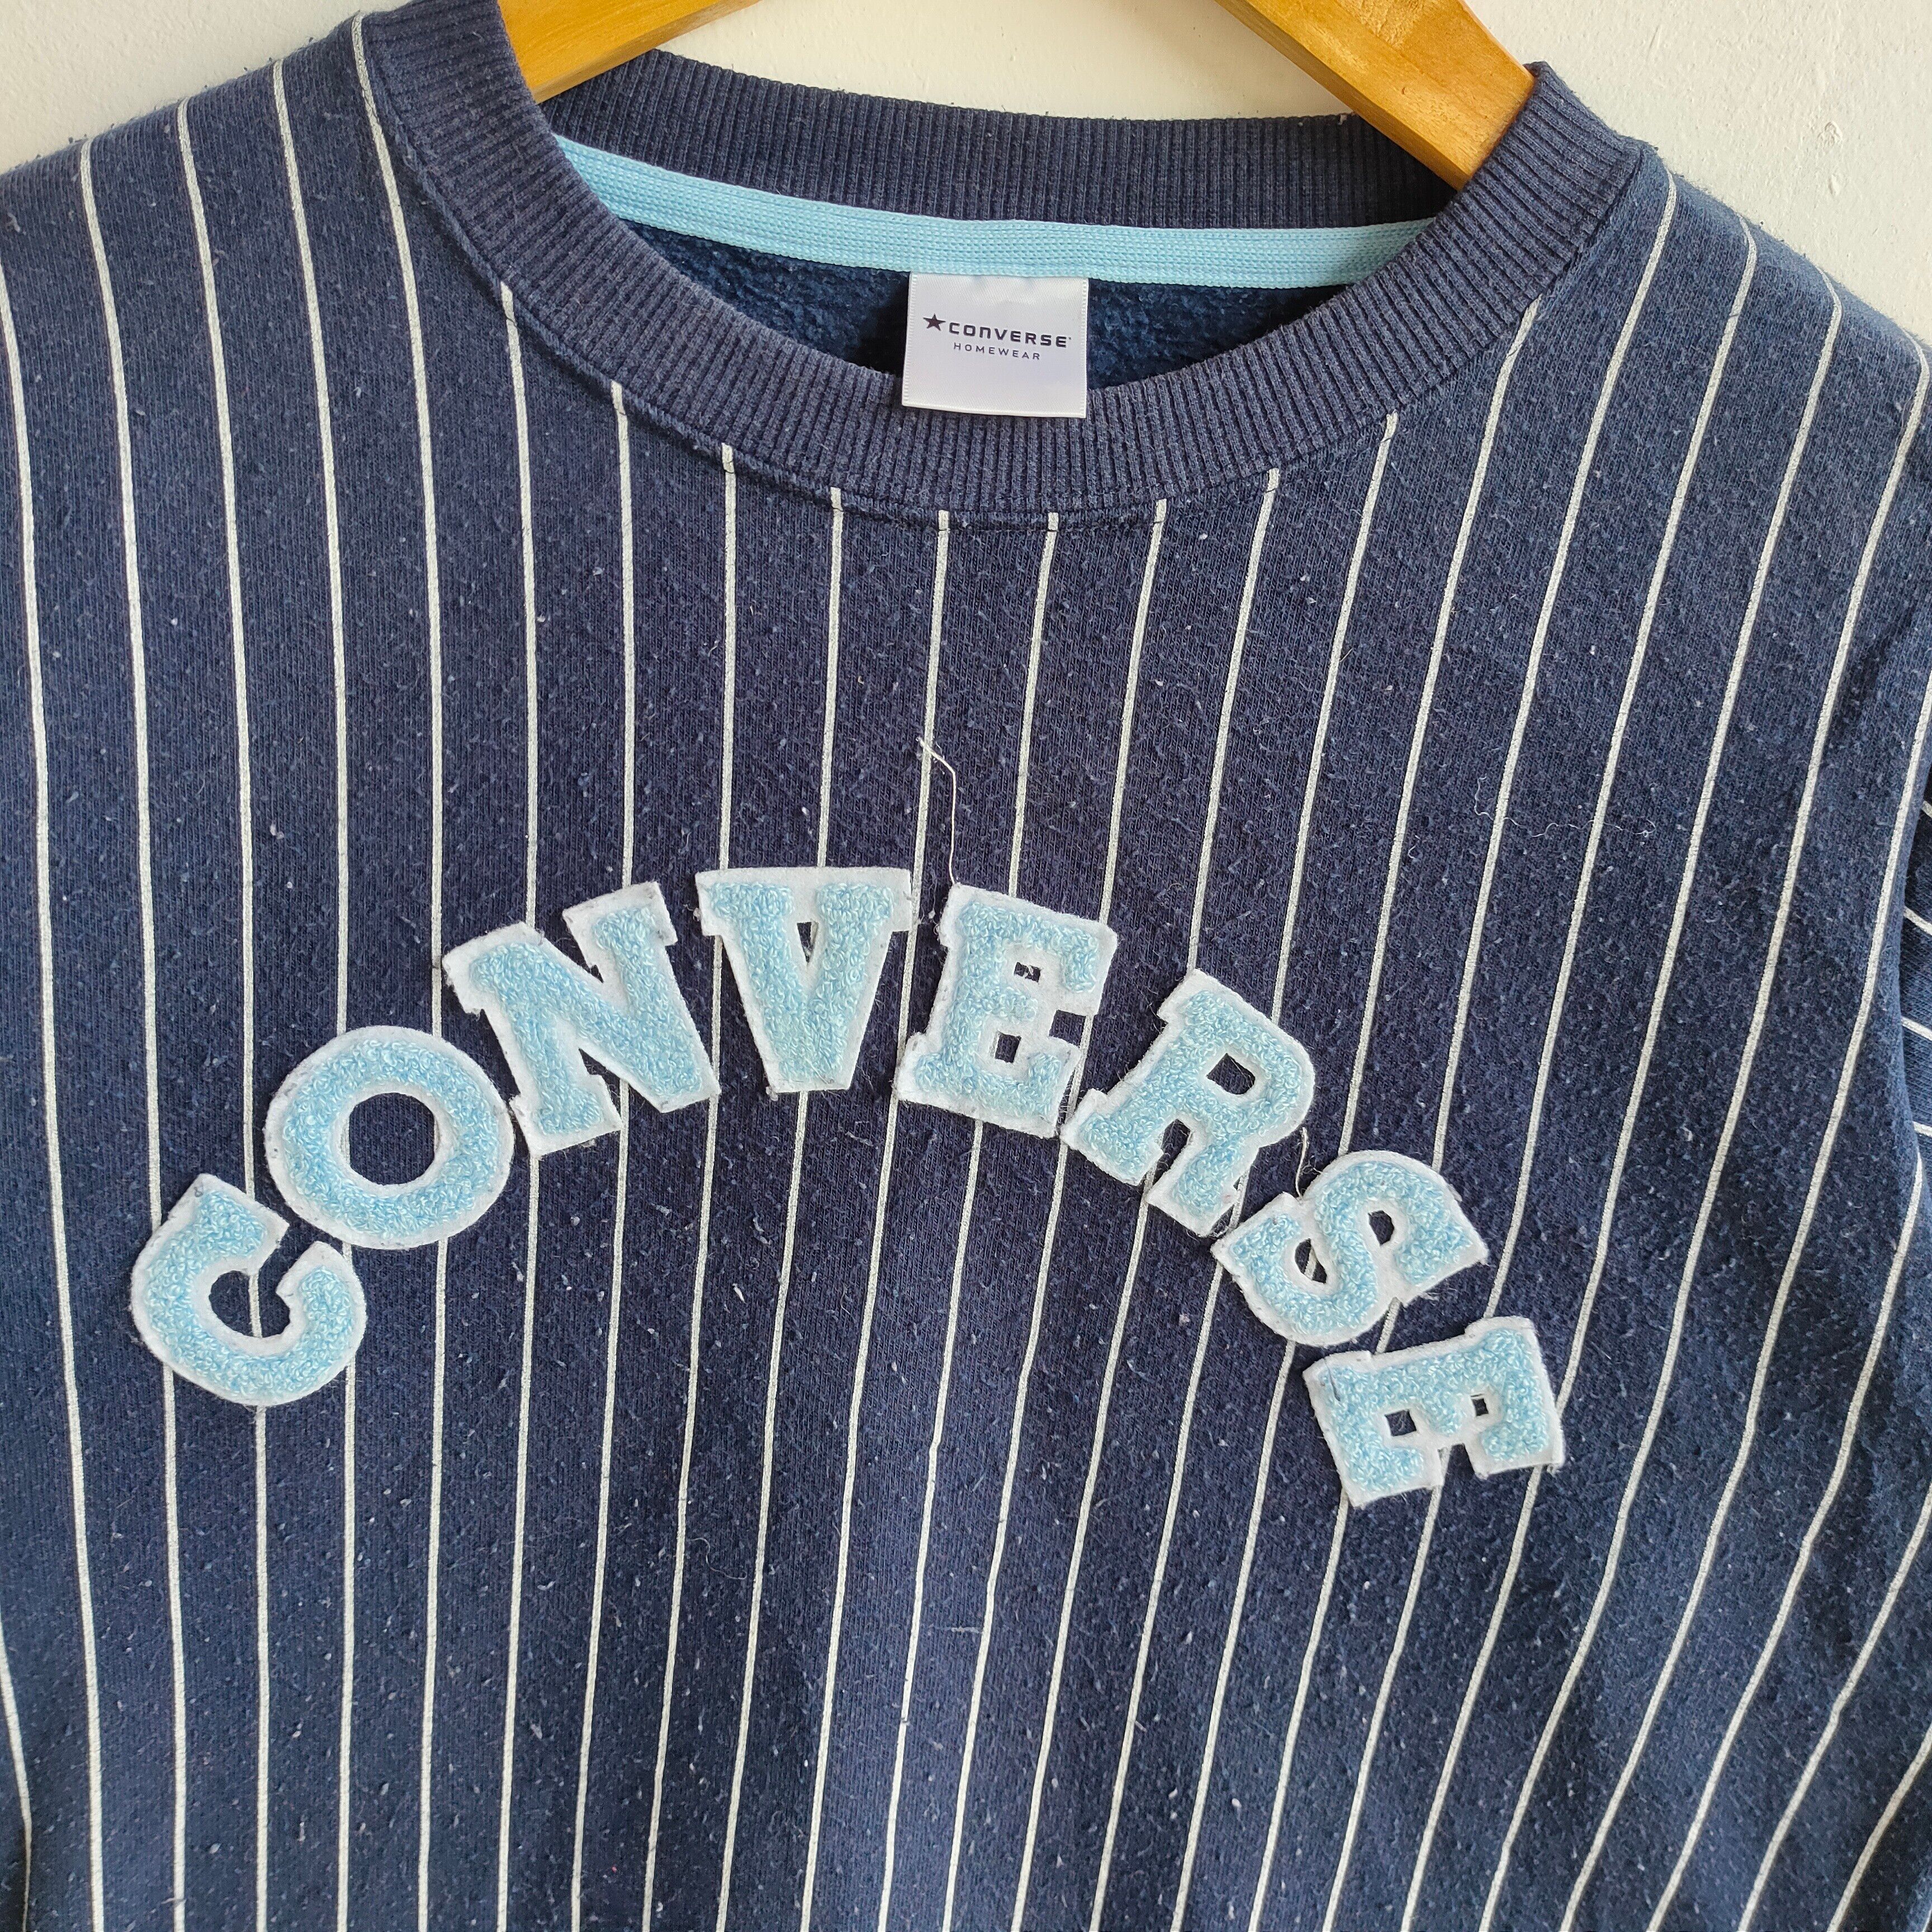 CONVERSE Big Embroidery Spell Out Stripe Pattern Sweatshirt - 2